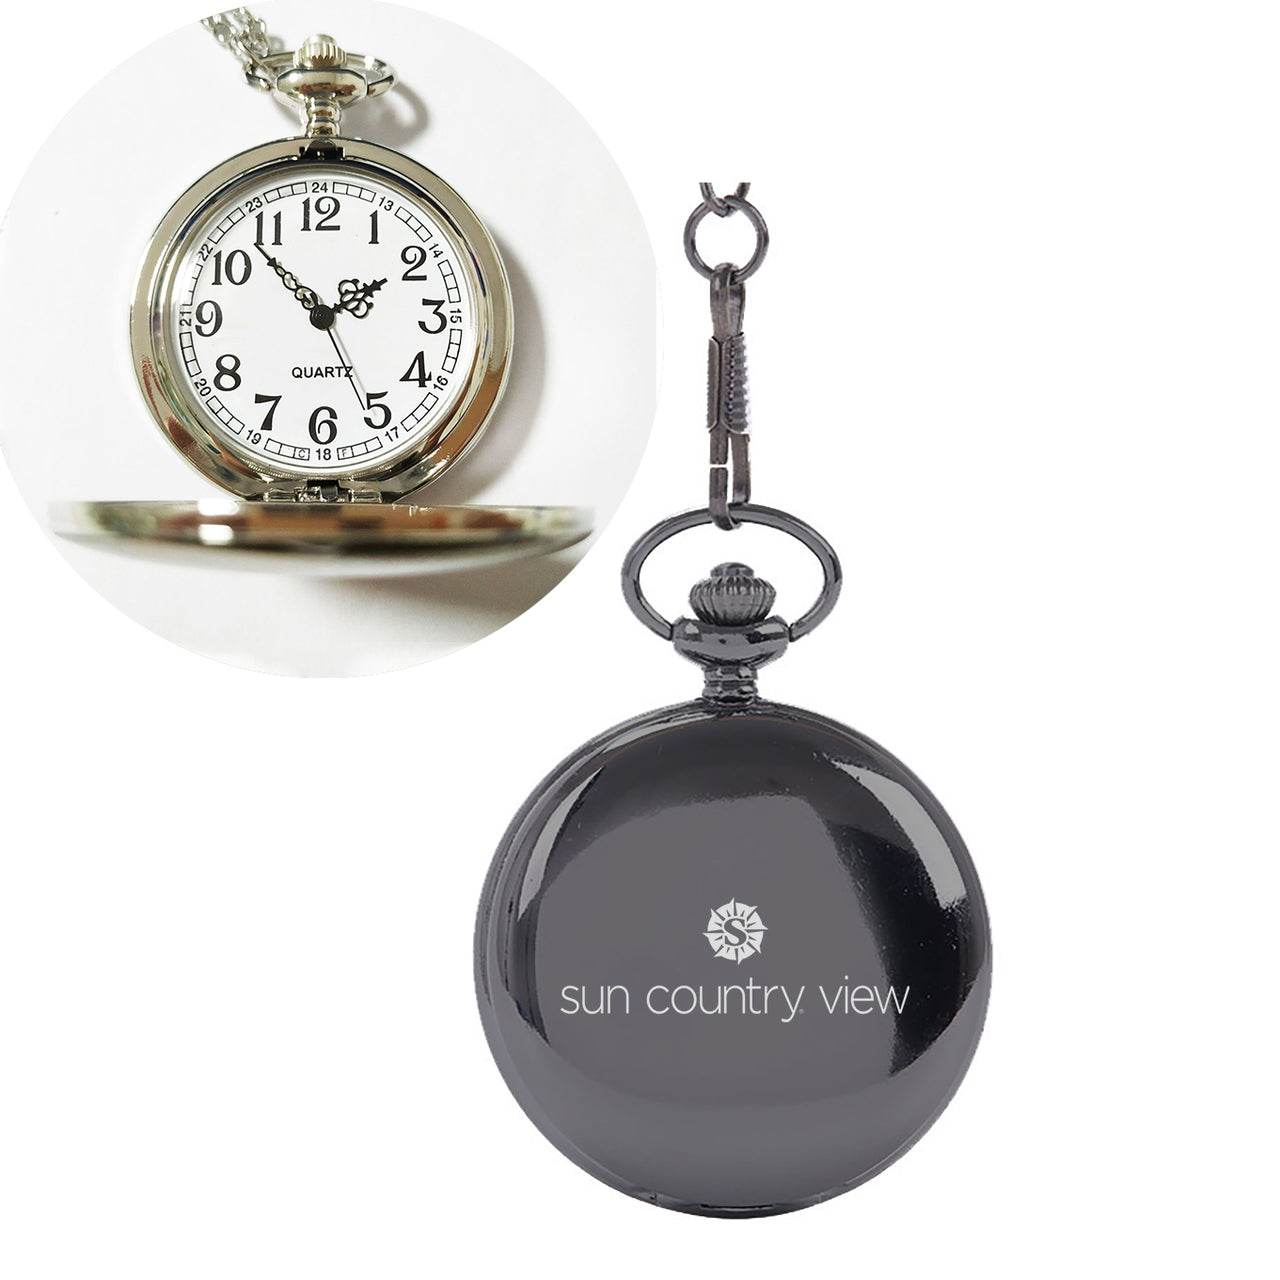 Sun Country Airlines Designed Pocket Watches